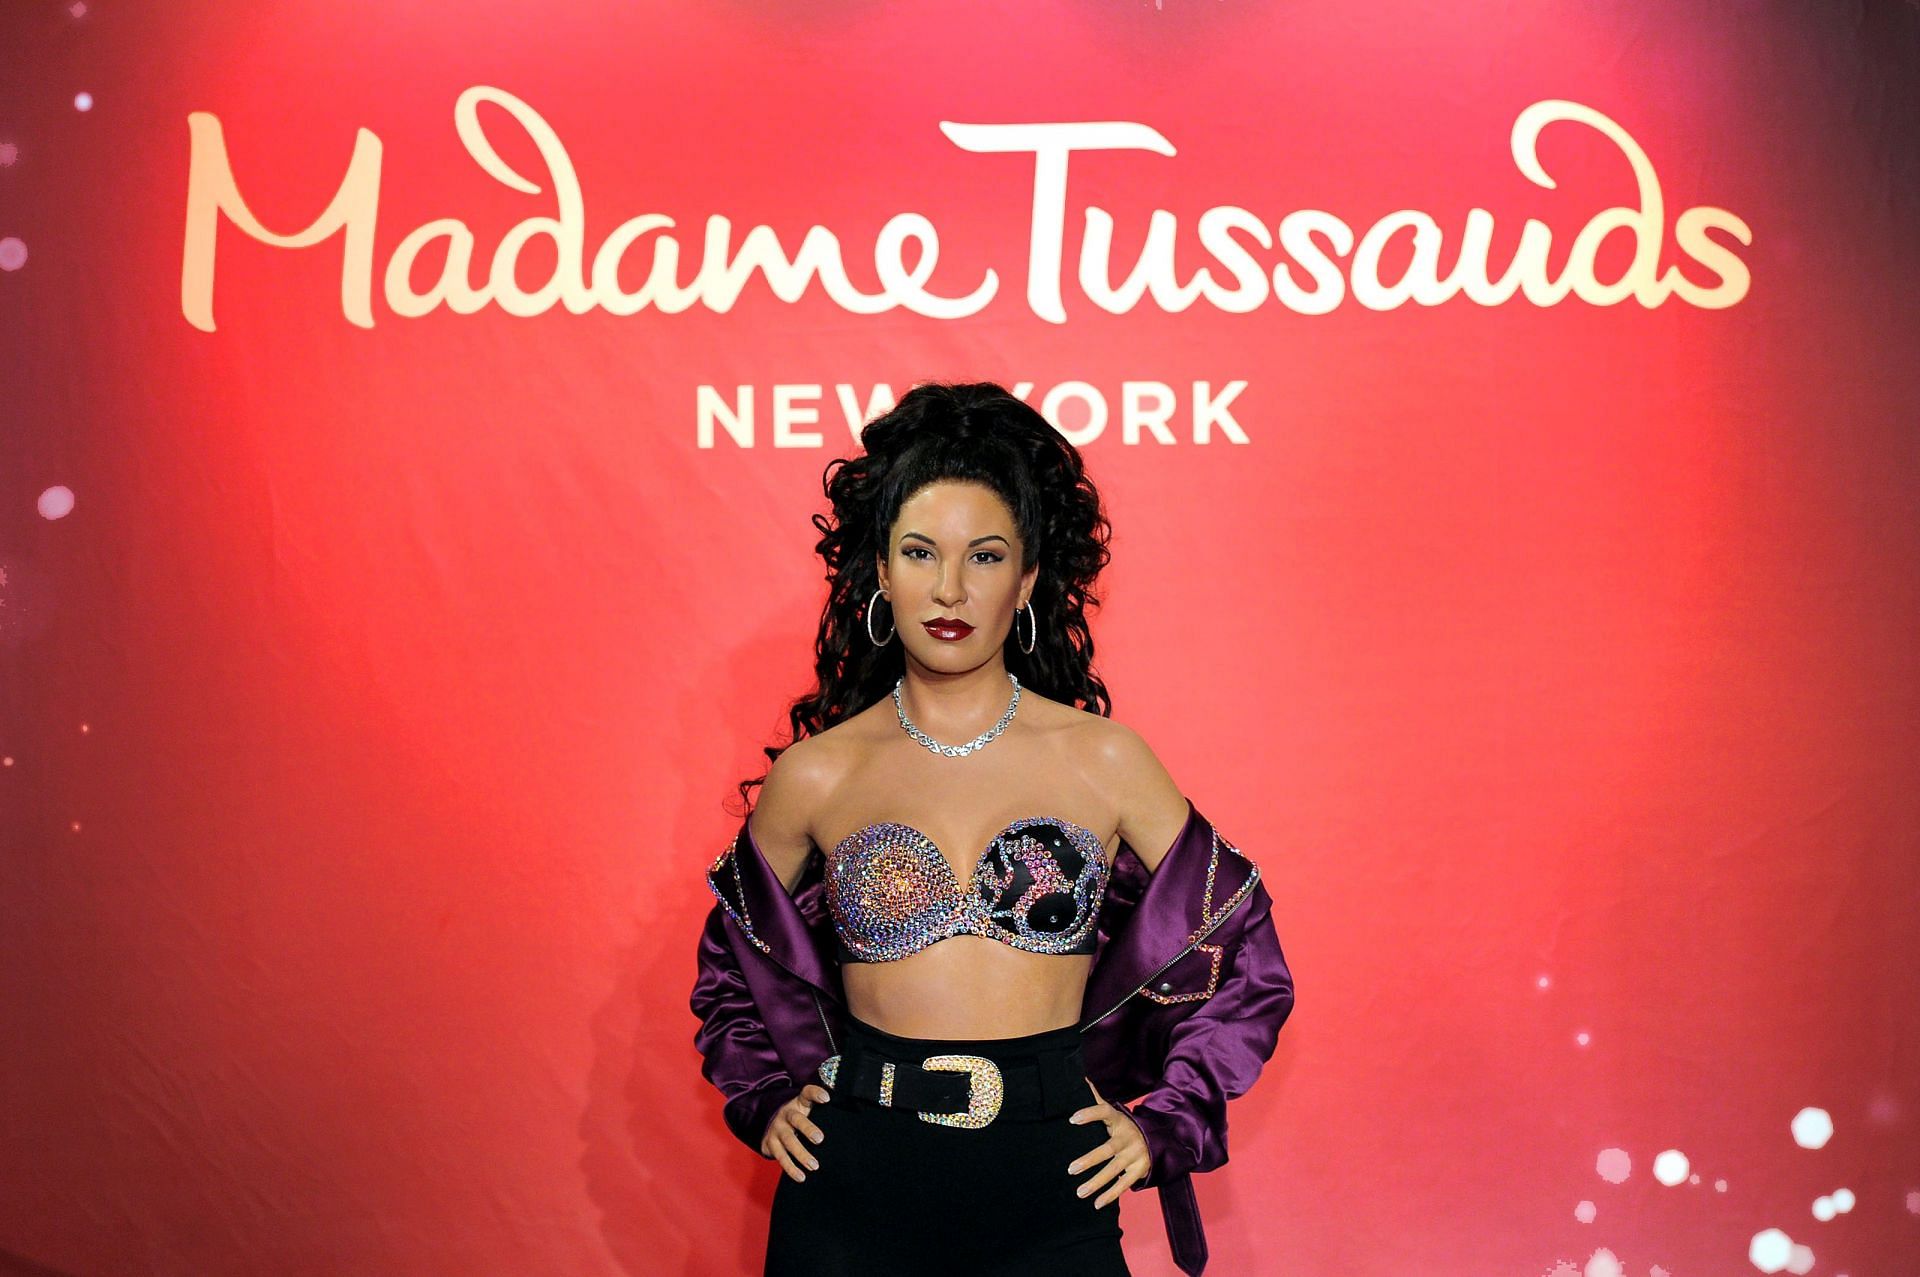 Madame Tussauds New York Hosts Selena Quintanilla&#039;s Sister for Unveiling of Late Singer&#039;s Figure in Times Square (Photo by Craig Barritt/Getty Images for Madame Tussauds New York)